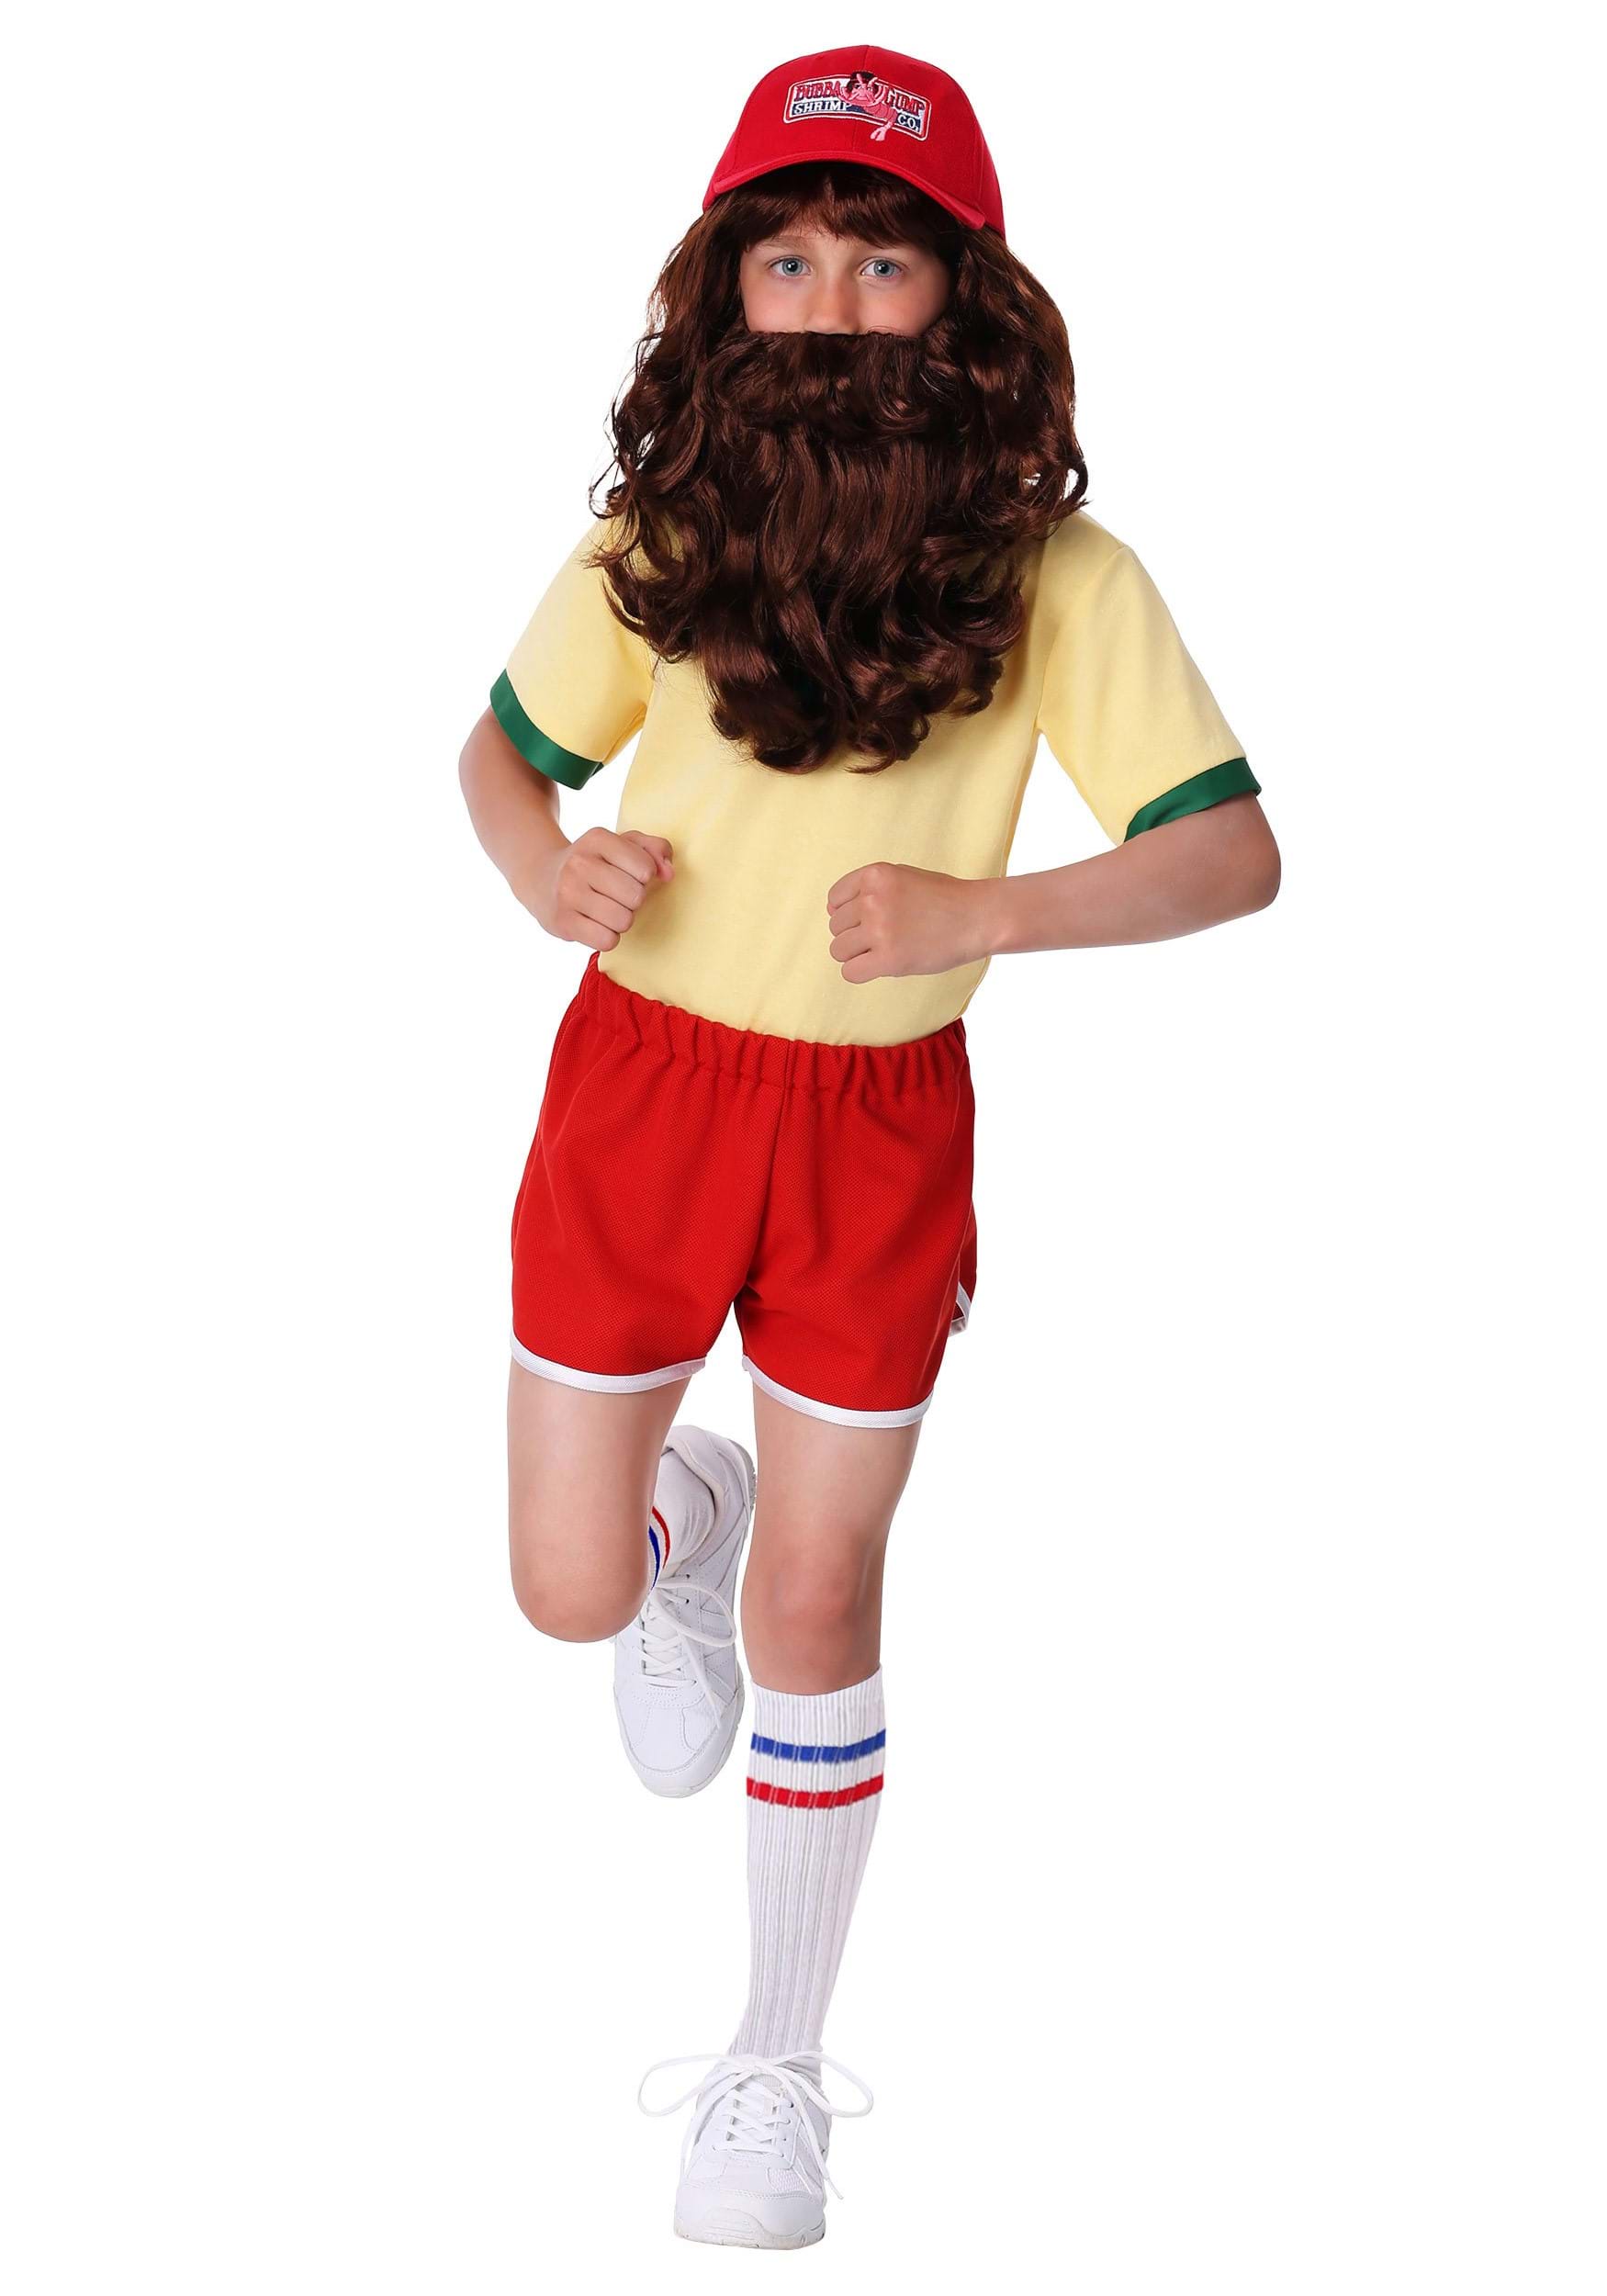 Photos - Fancy Dress Forrest FUN Costumes Kid's  Gump Running Costume Yellow/Red GUM6020CH 